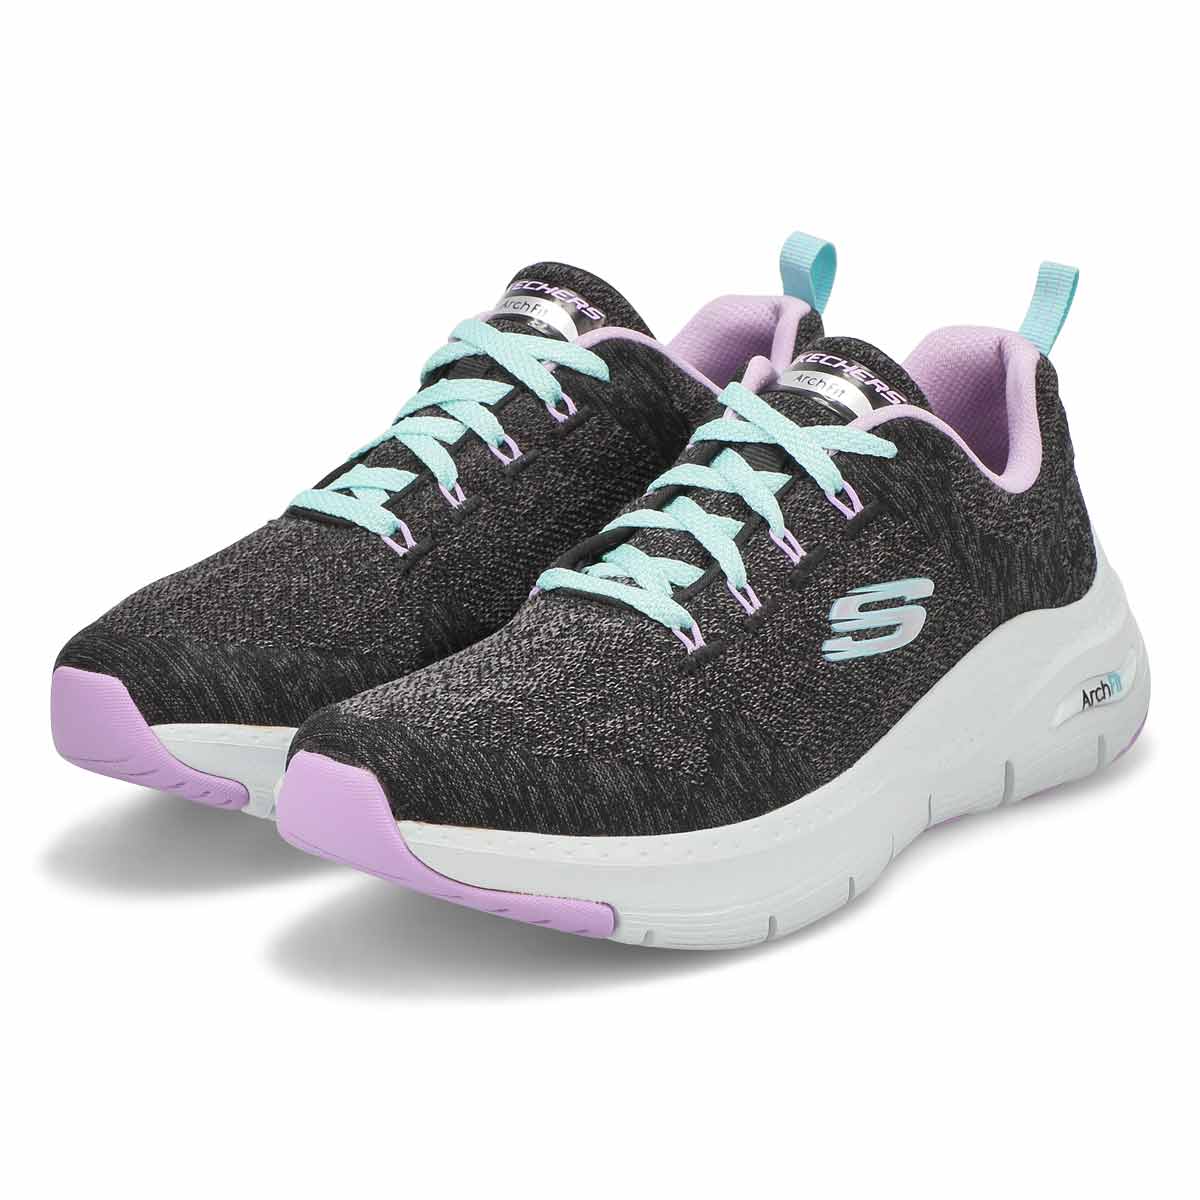 Skechers Women's Arch Fit Comfy Wave Sneaker | SoftMoc.com